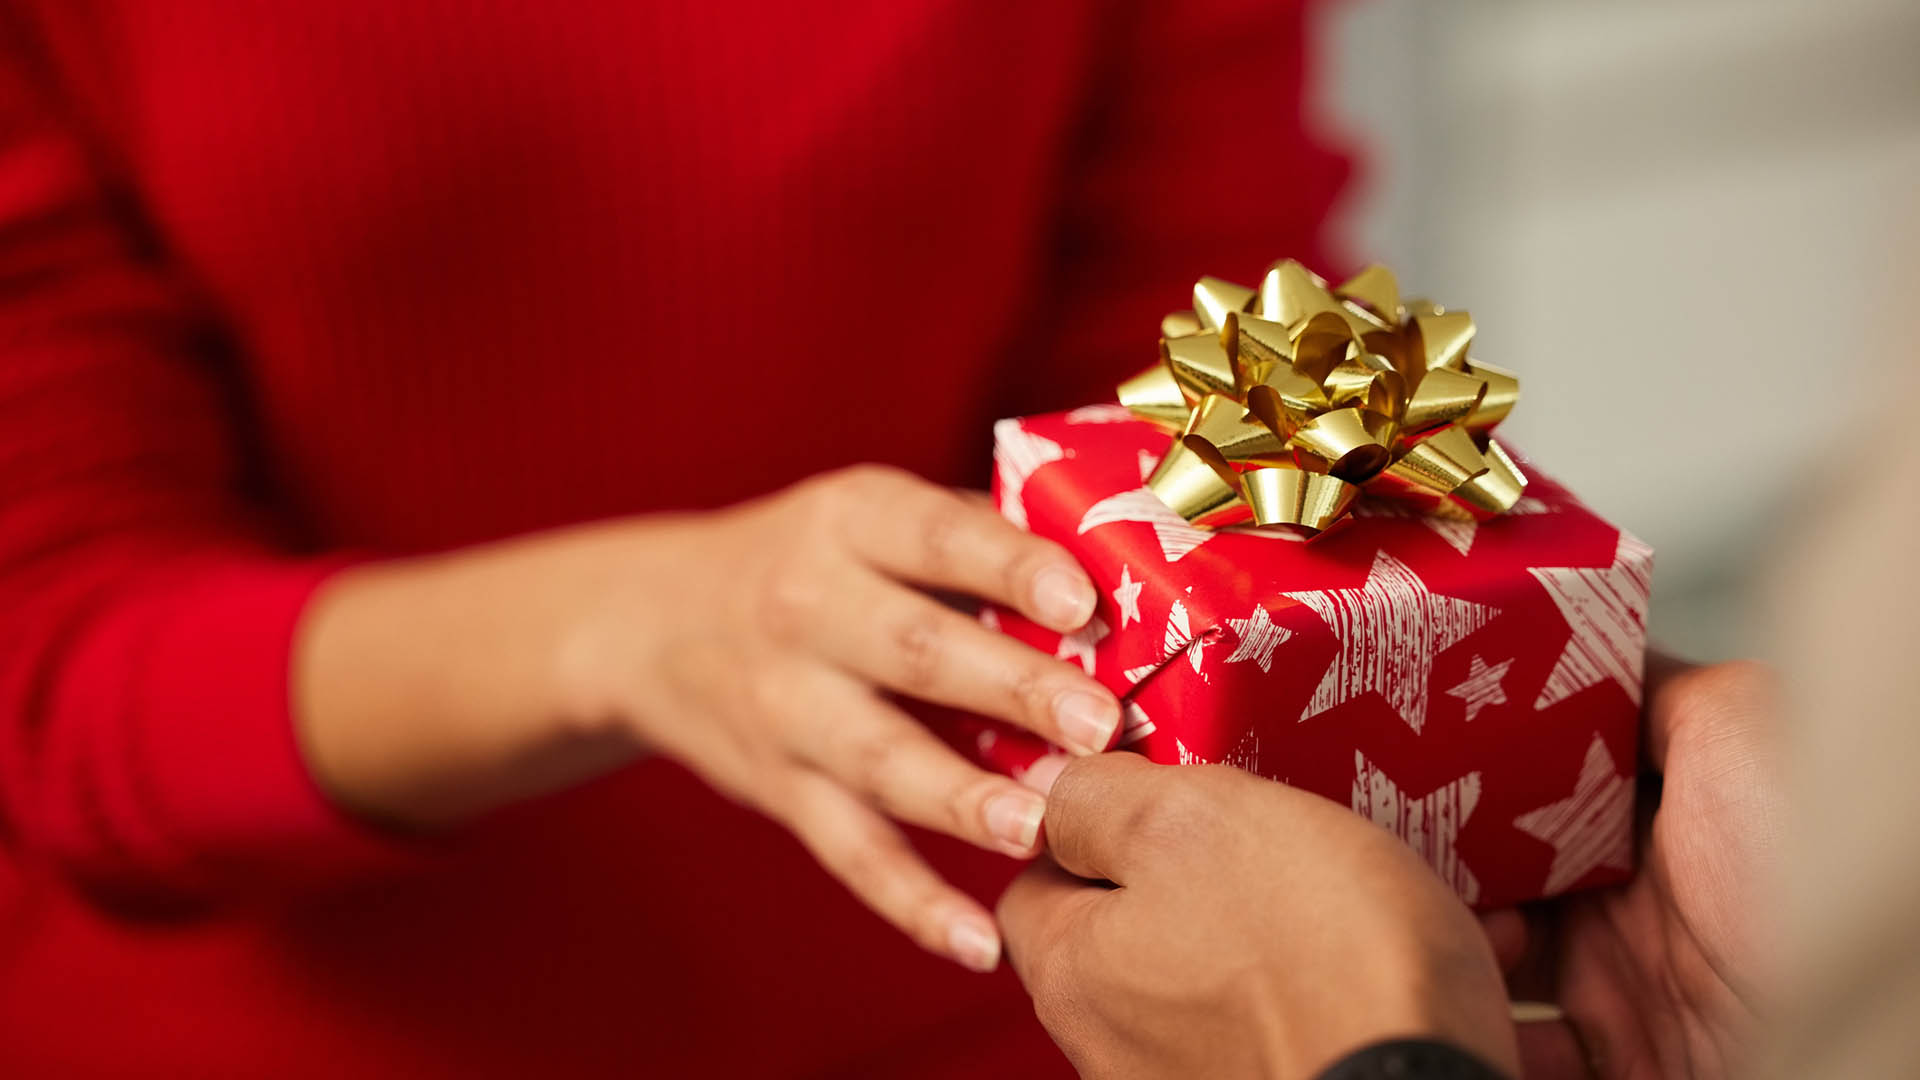 If My Parents Gift Their Home to Me, Do I Have a Tax Liability?